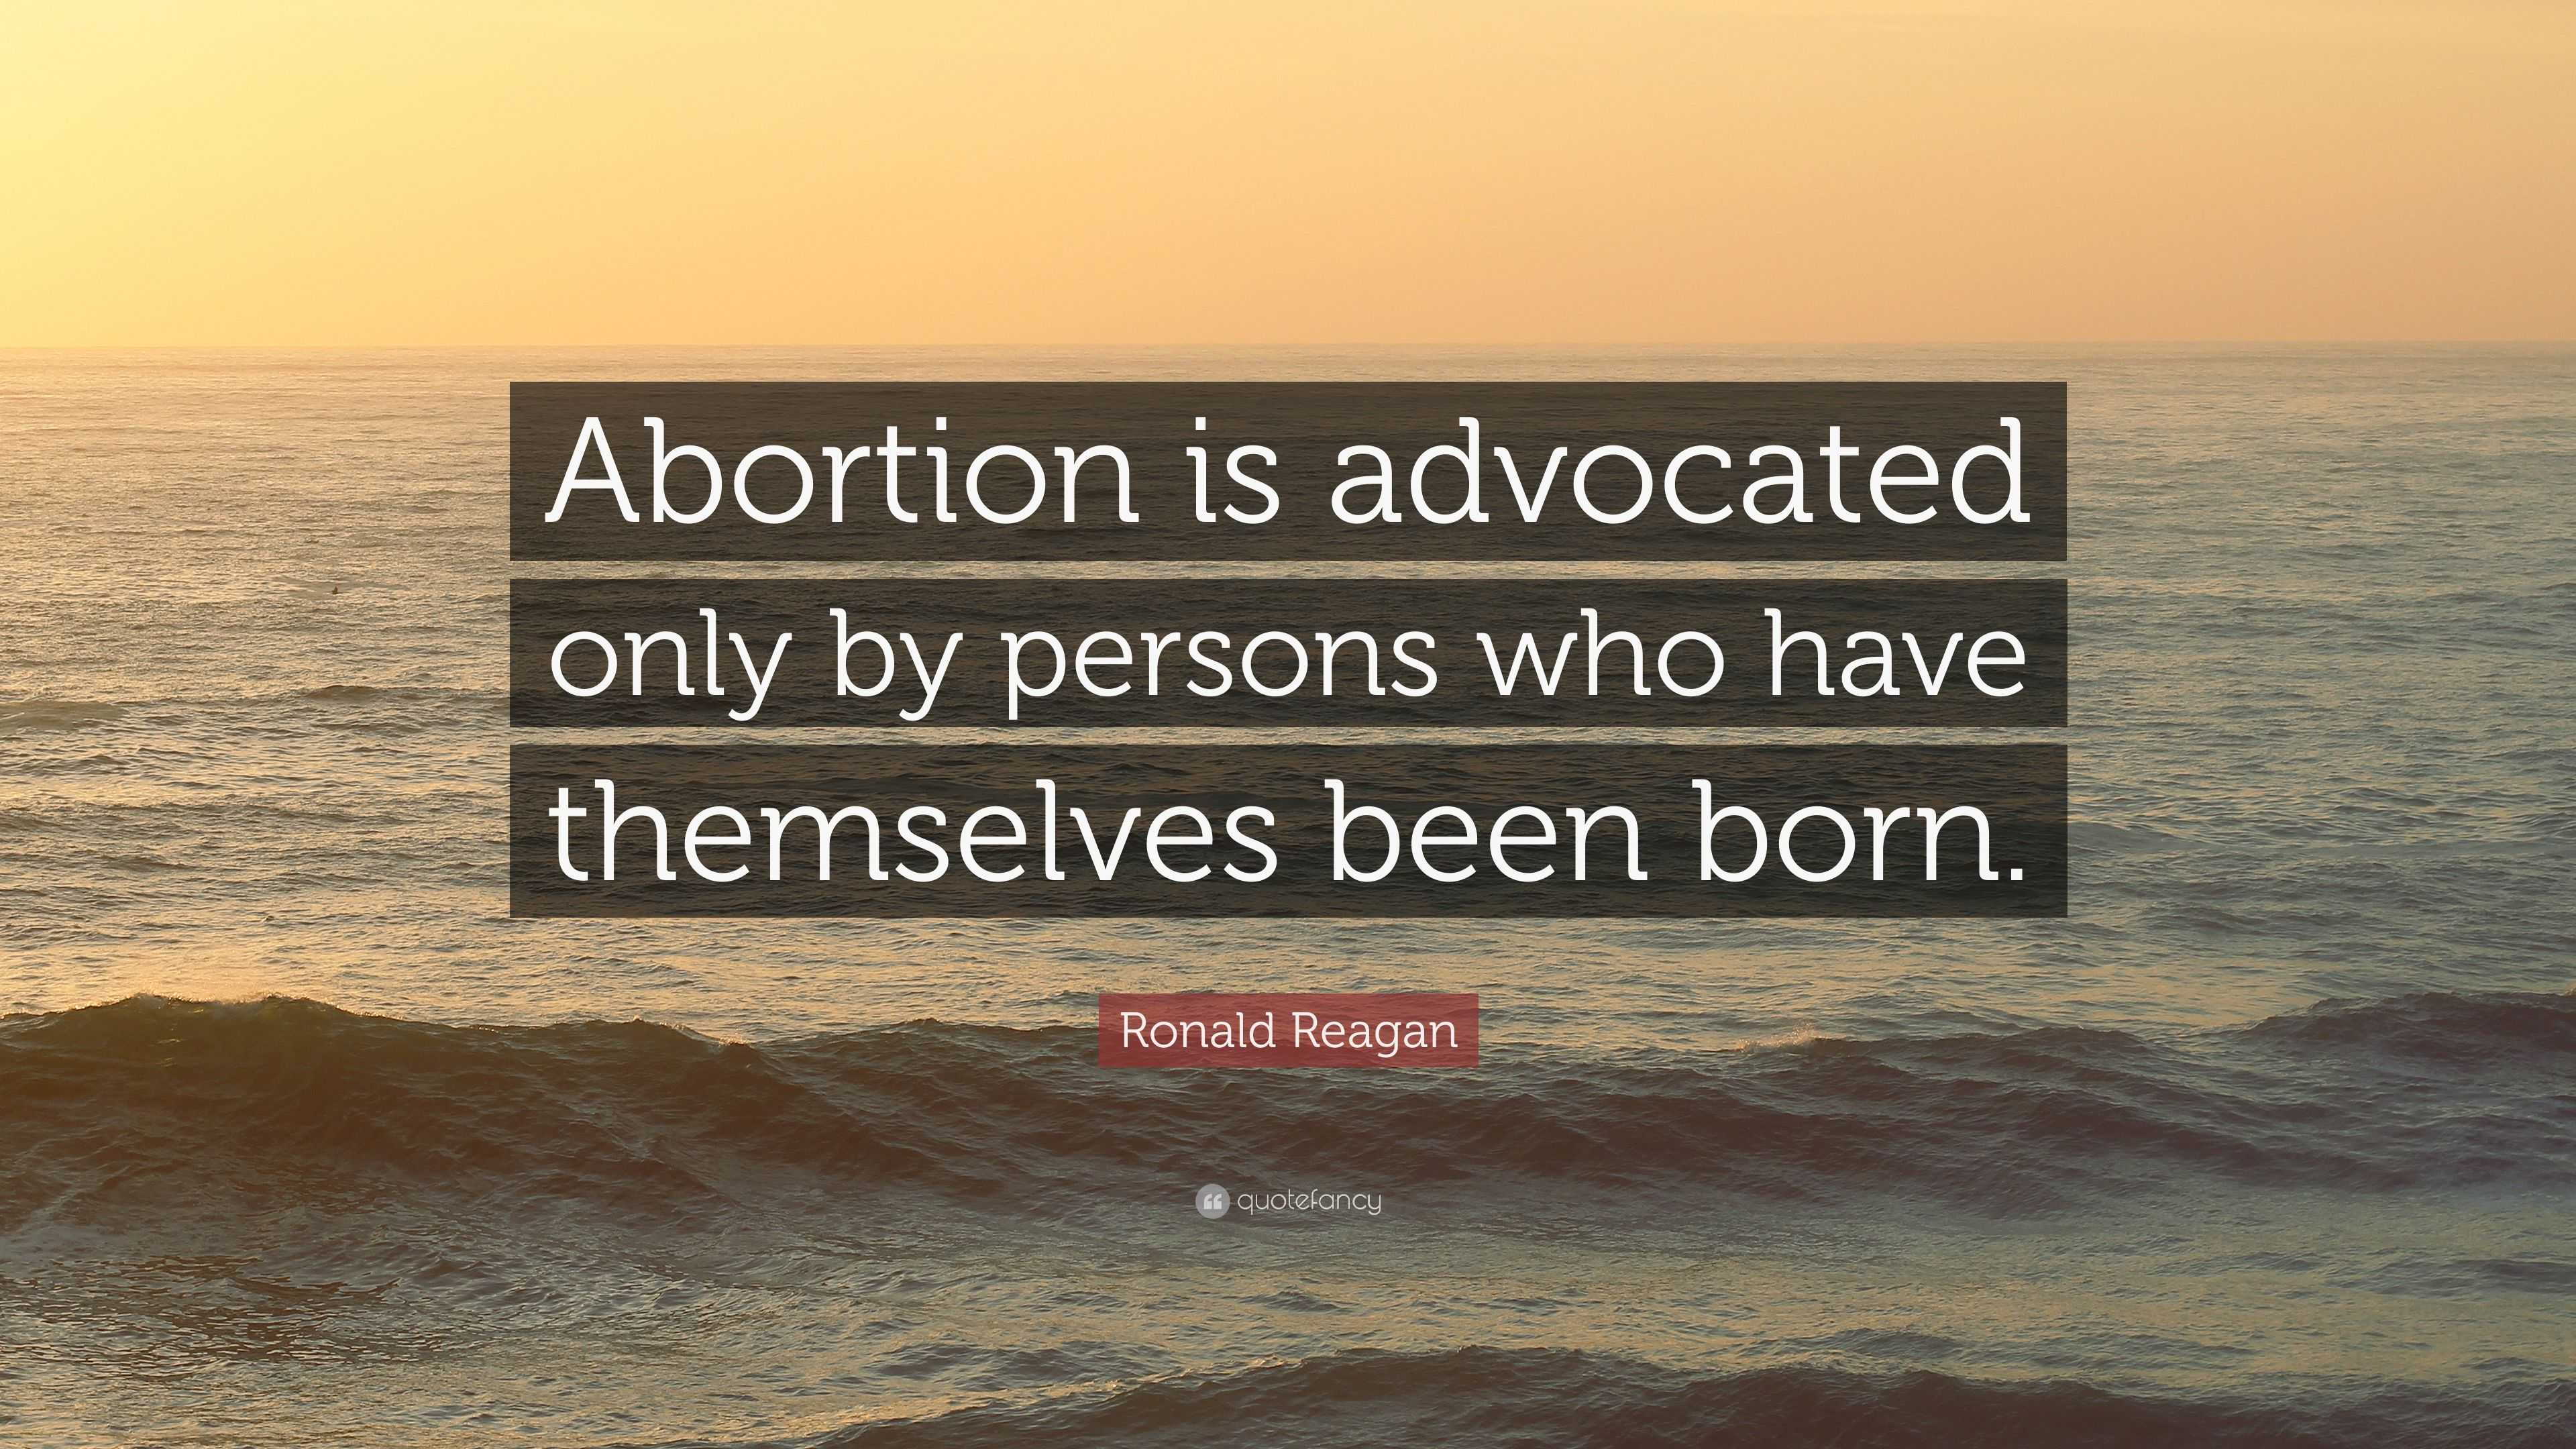 Ronald Reagan Quote: "Abortion is advocated only by persons who have themselves been born." (12 ...